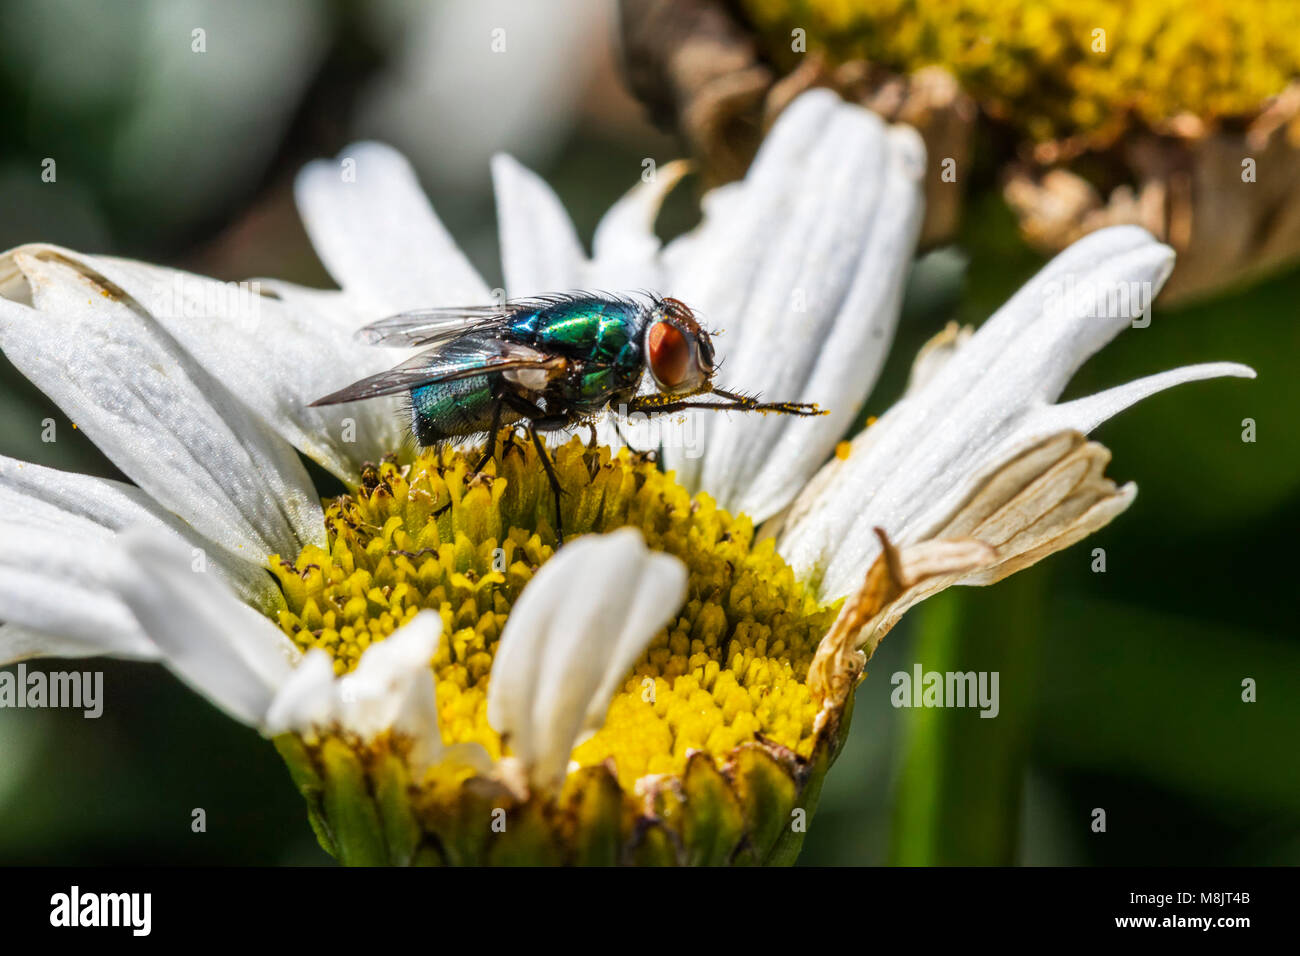 Fly feeding on daisy nectar rubbing legs together covered in pollen in profile legs outstretched while balanced on the yellow centre of the flower Stock Photo